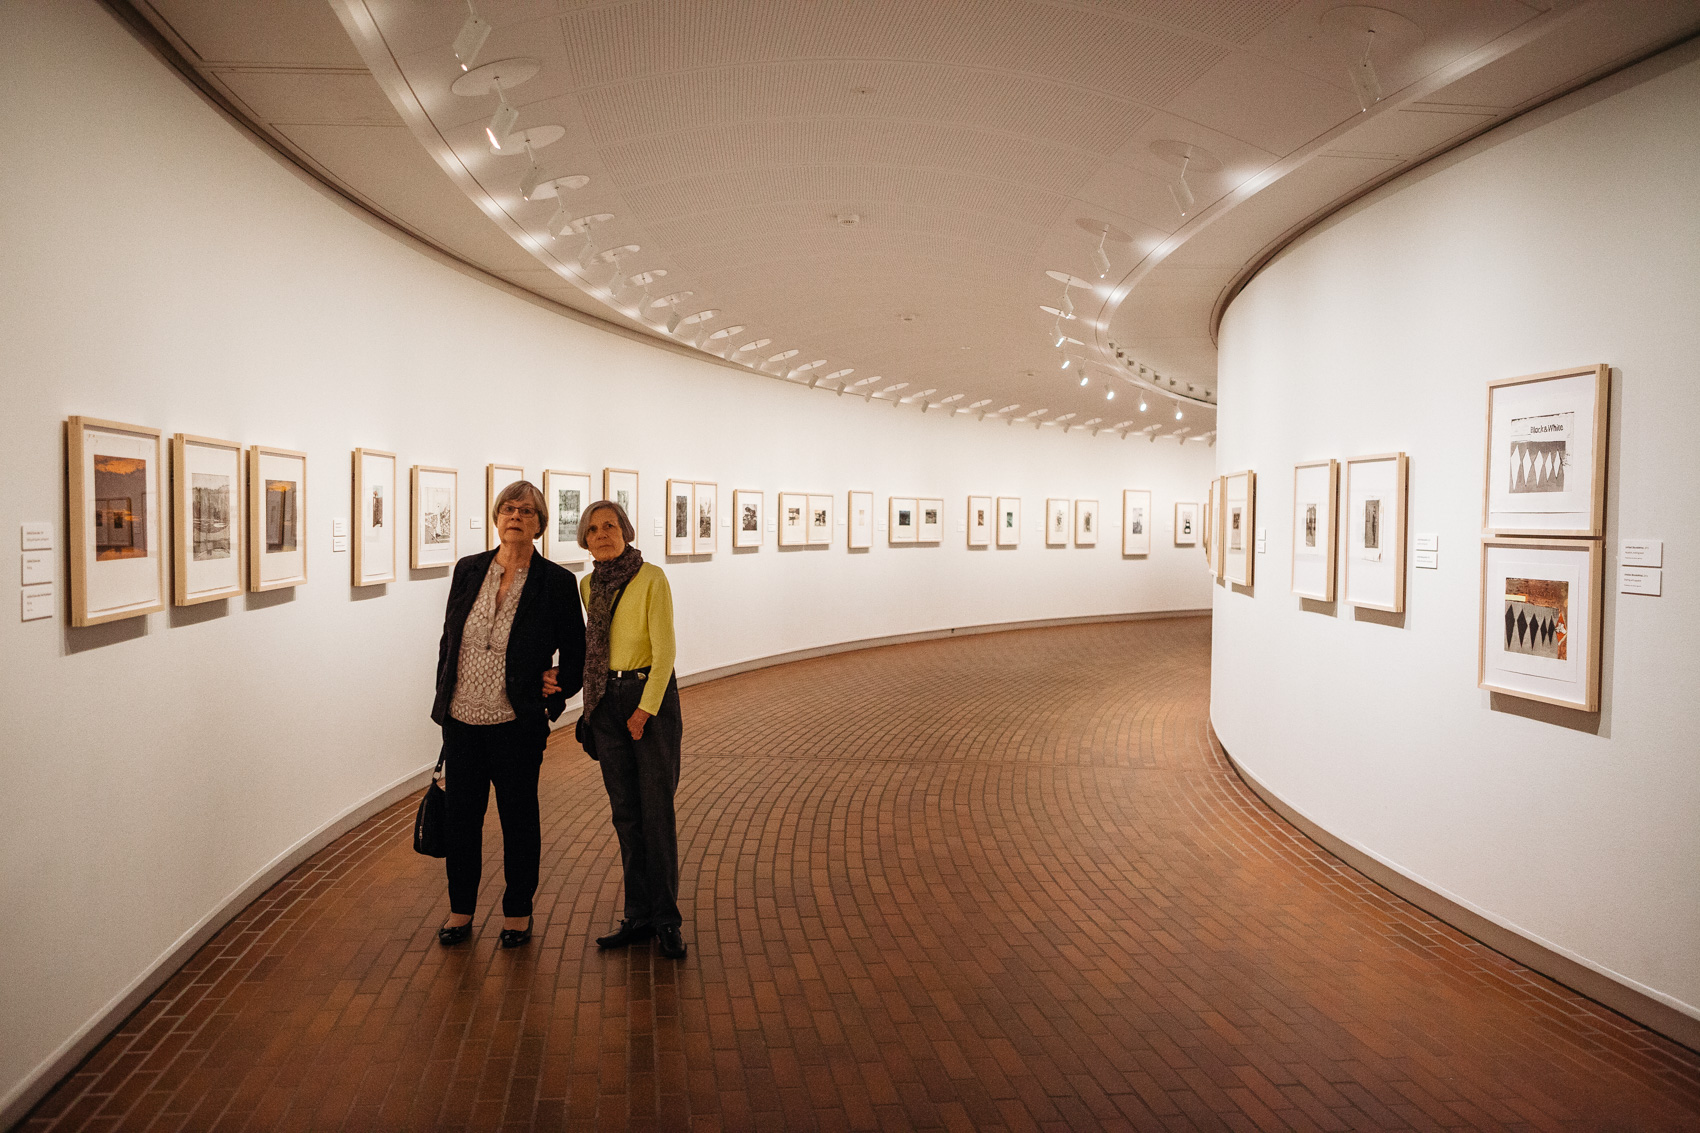 Visitors admire the art at the Louisiana Museum in Denmark